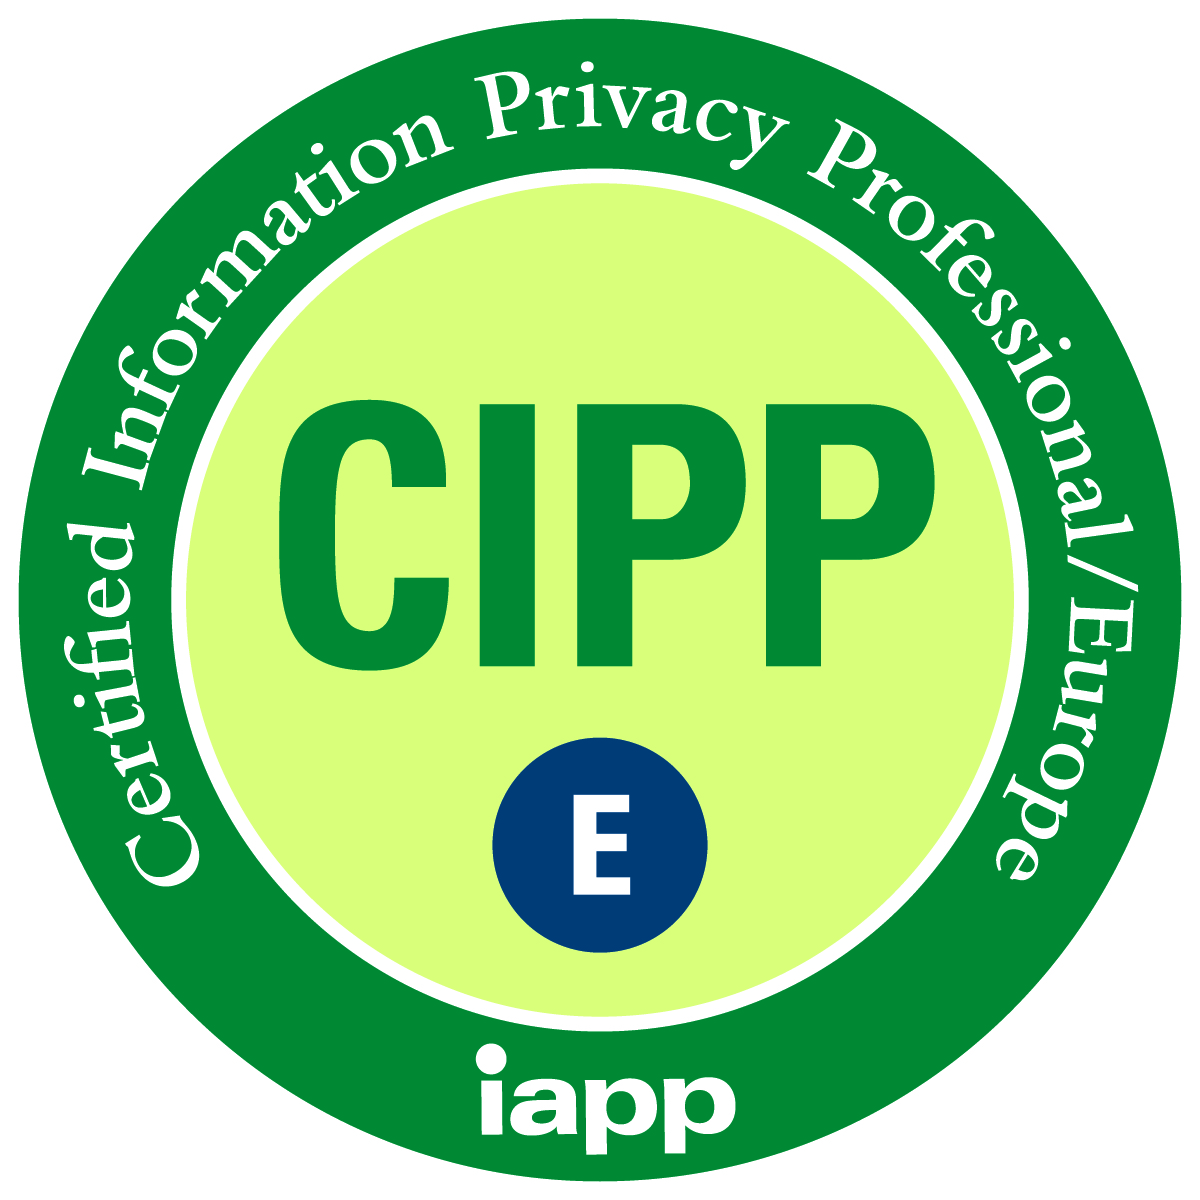 Certified Information Privacy Professional/Europe (CIPP/E) - Training only - IN PERSON